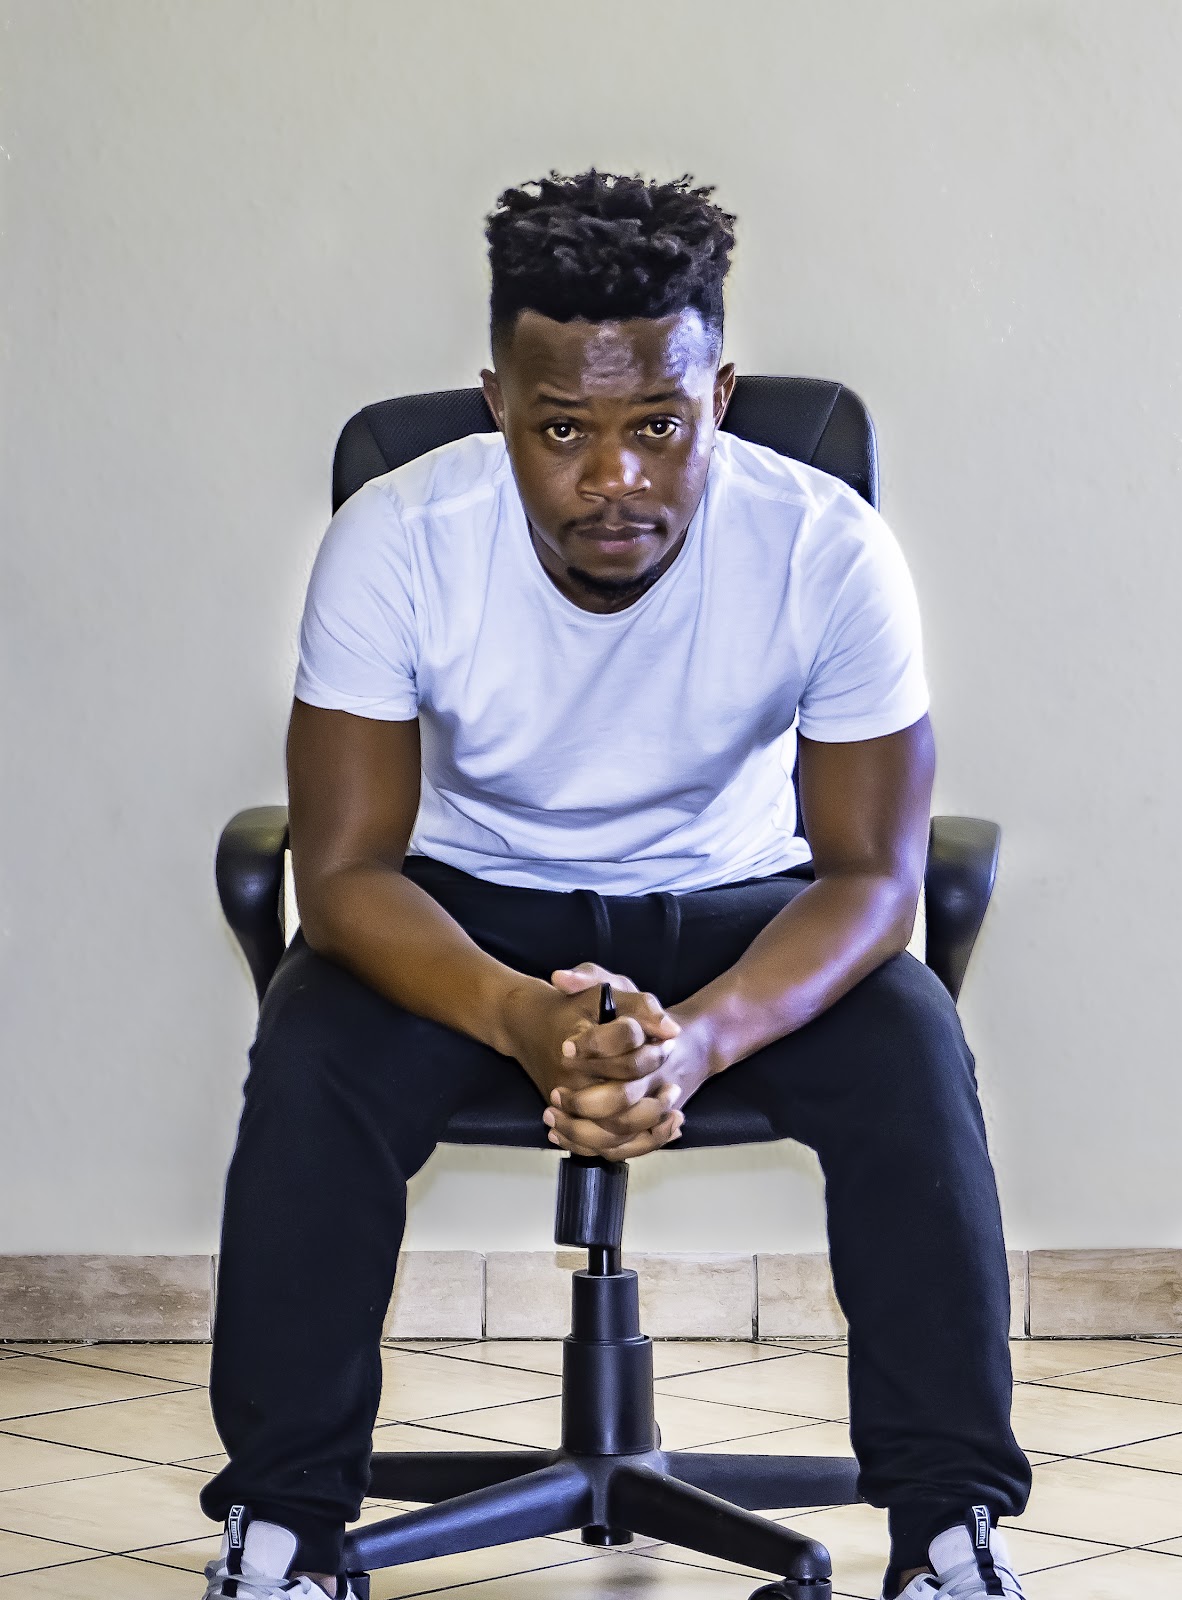 Instant Visuals is the brain child of Nhlamulo Chabalala, a web developer and digital marketing specialist